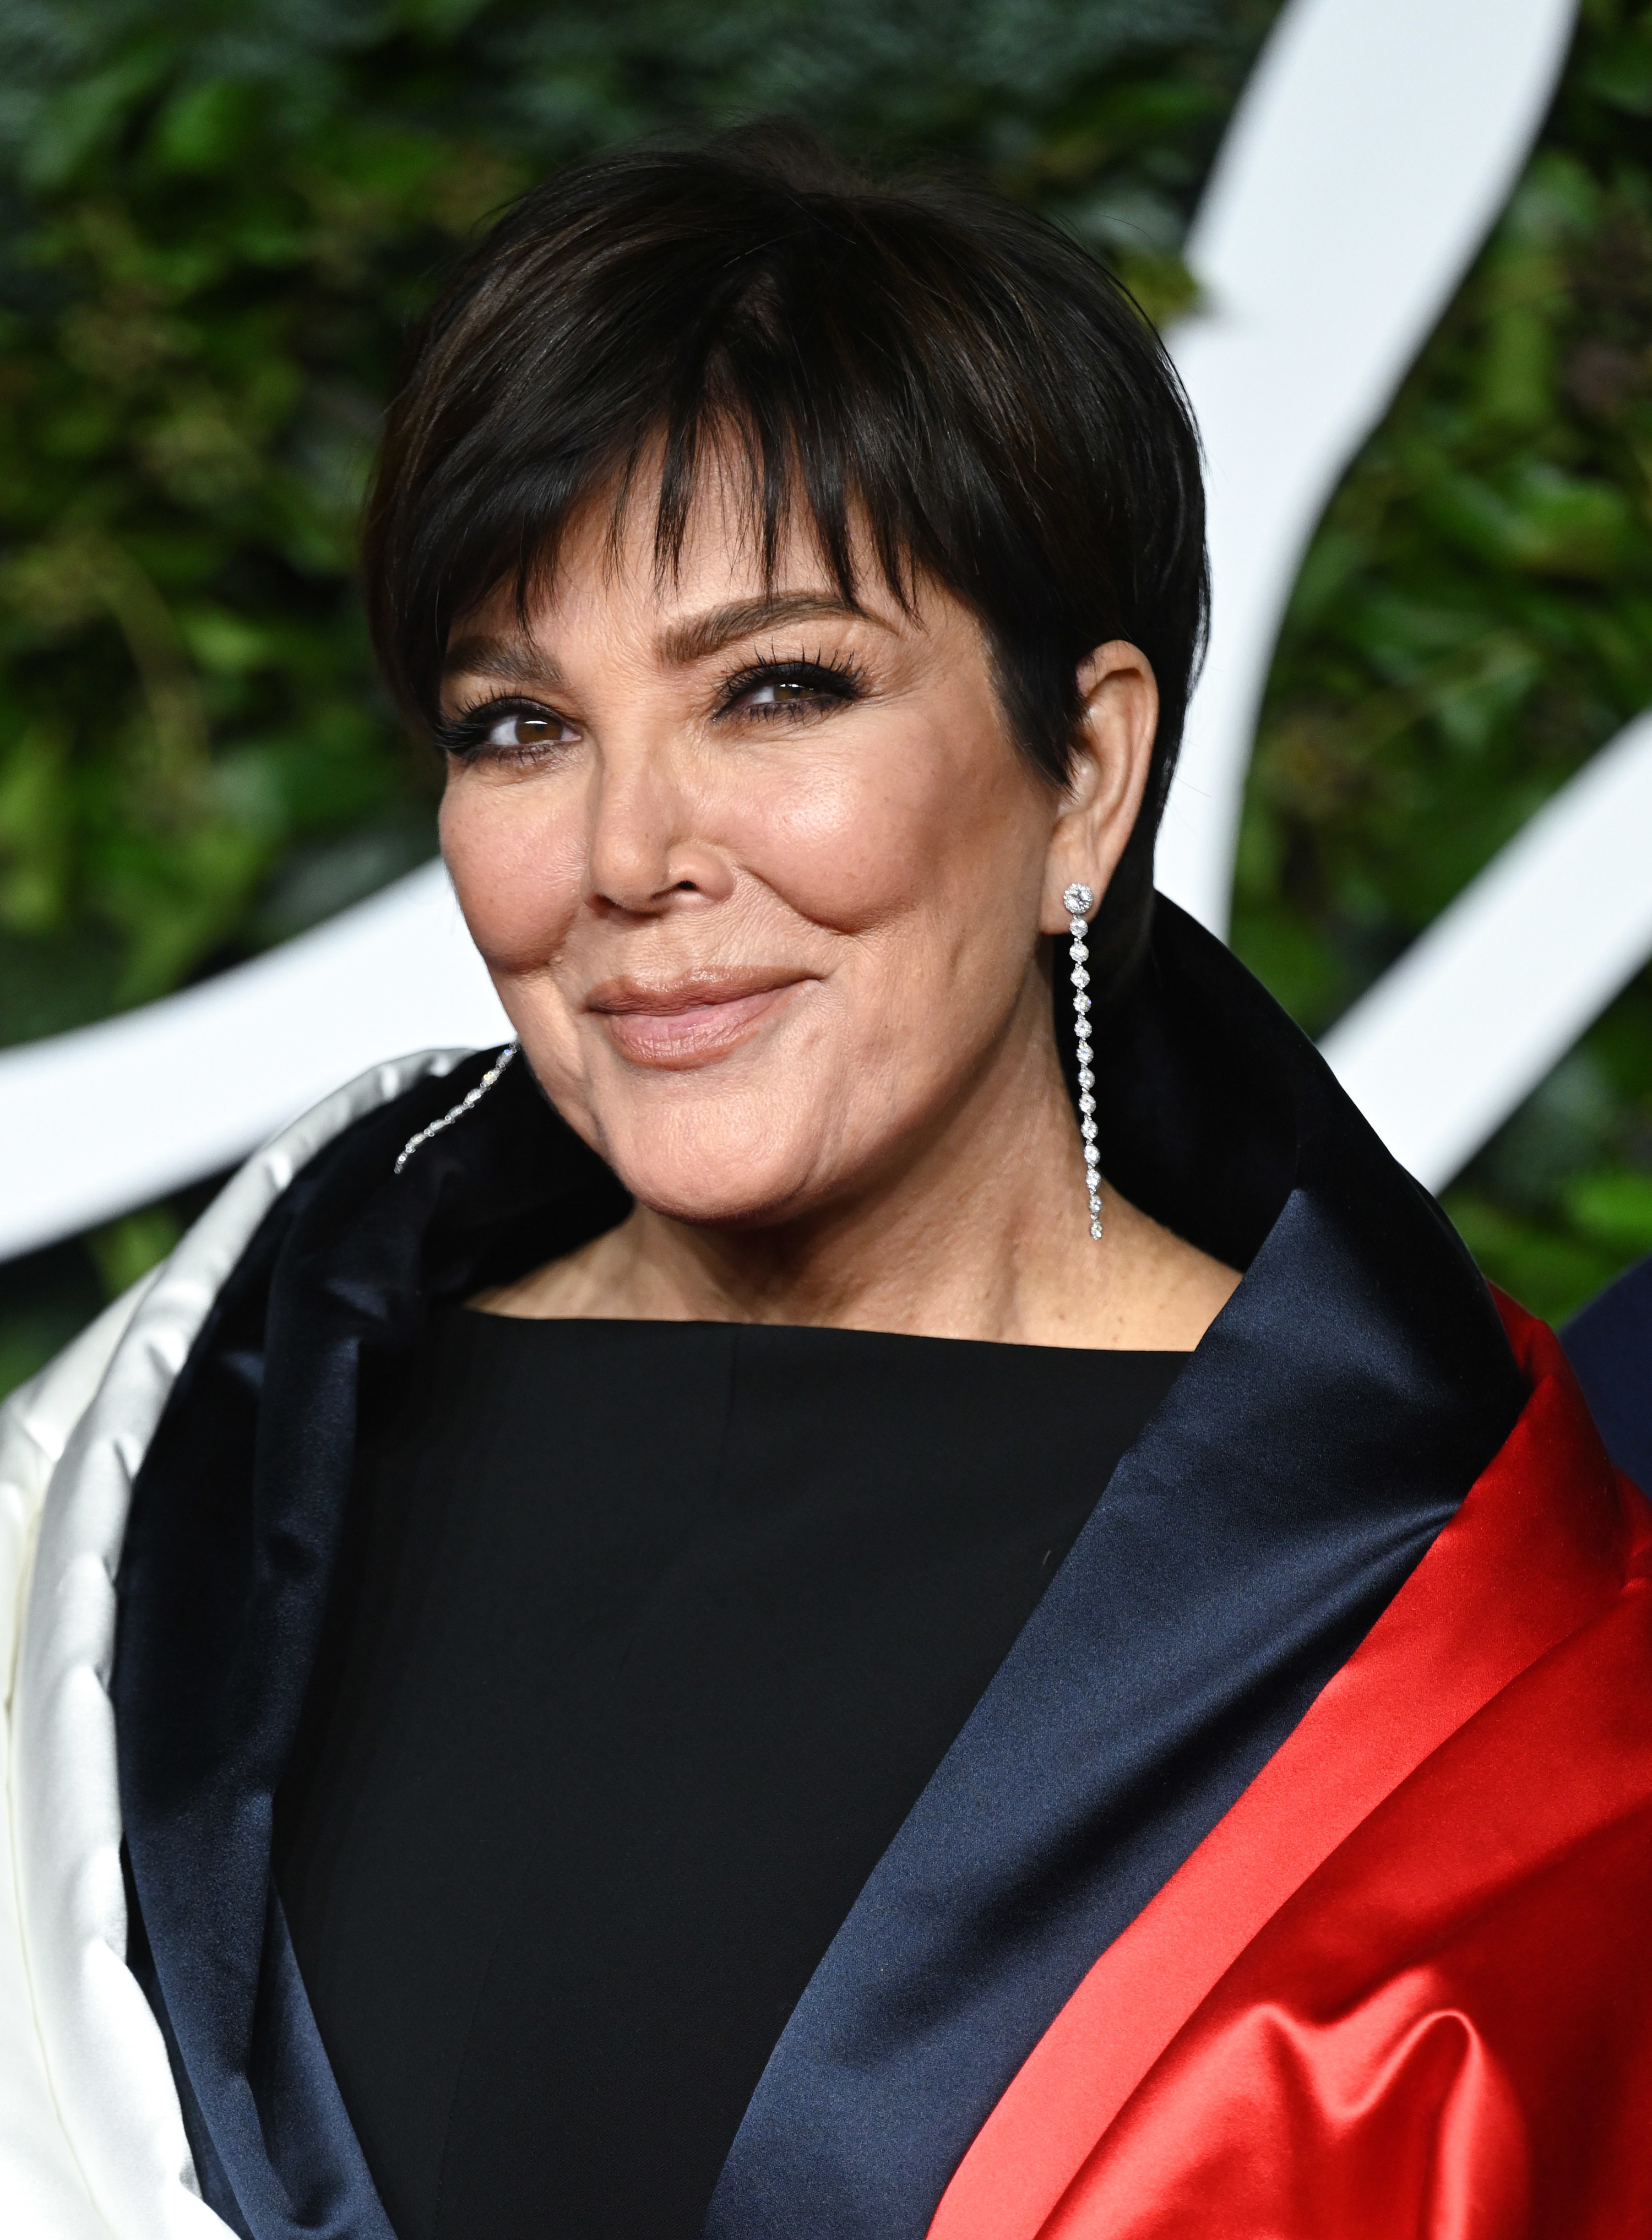 Kris Jenner attends The Fashion Awards 2021 at the Royal Albert Hall